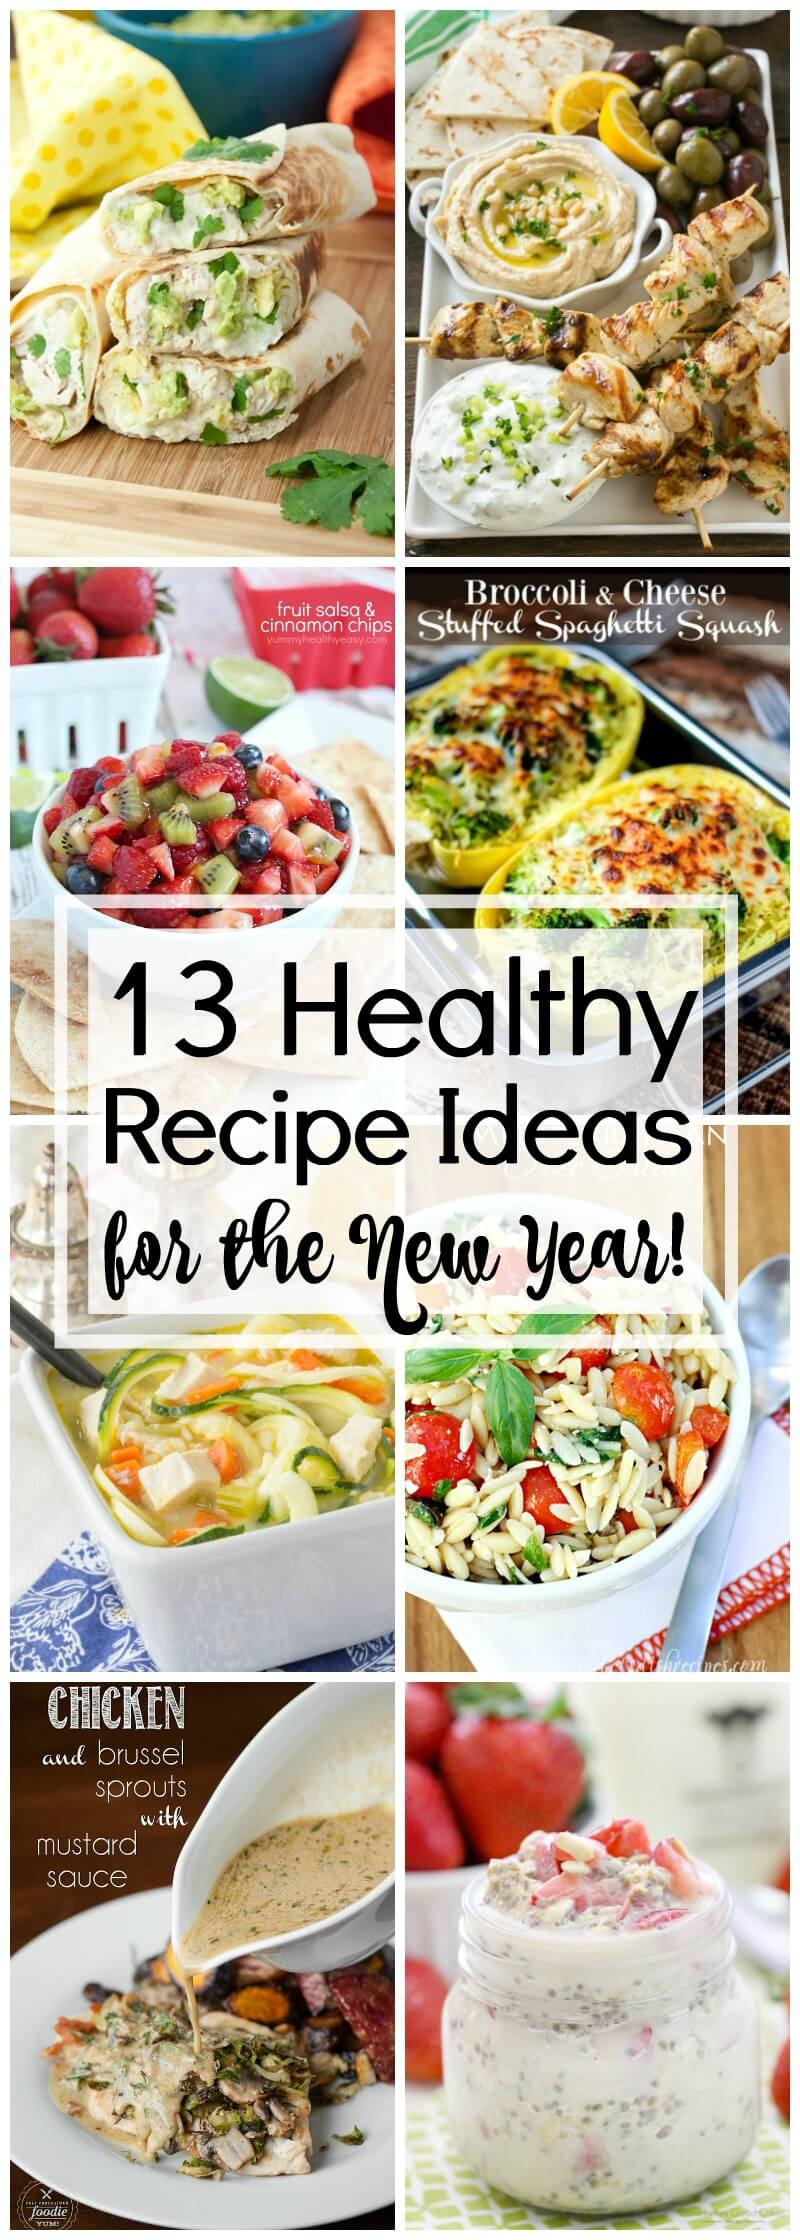 13 Healthy Recipe Ideas for the New Year